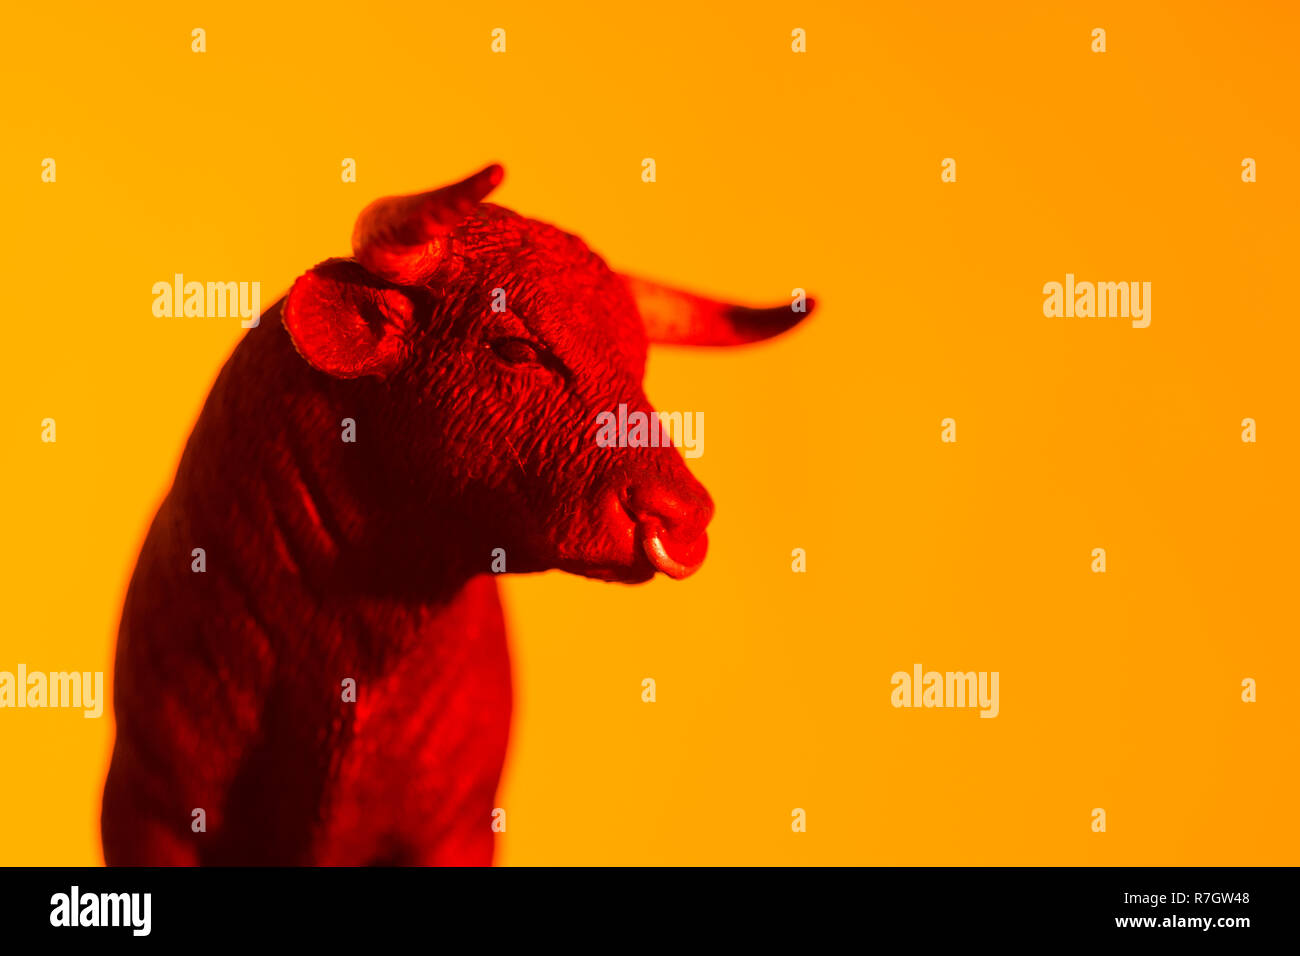 Toy bull against orange-yellow glowing sunset type backdrop. Metaphor for 'confidence' and Stock Market bulls, bullishness. See ADD. DETAILS NOTE Stock Photo